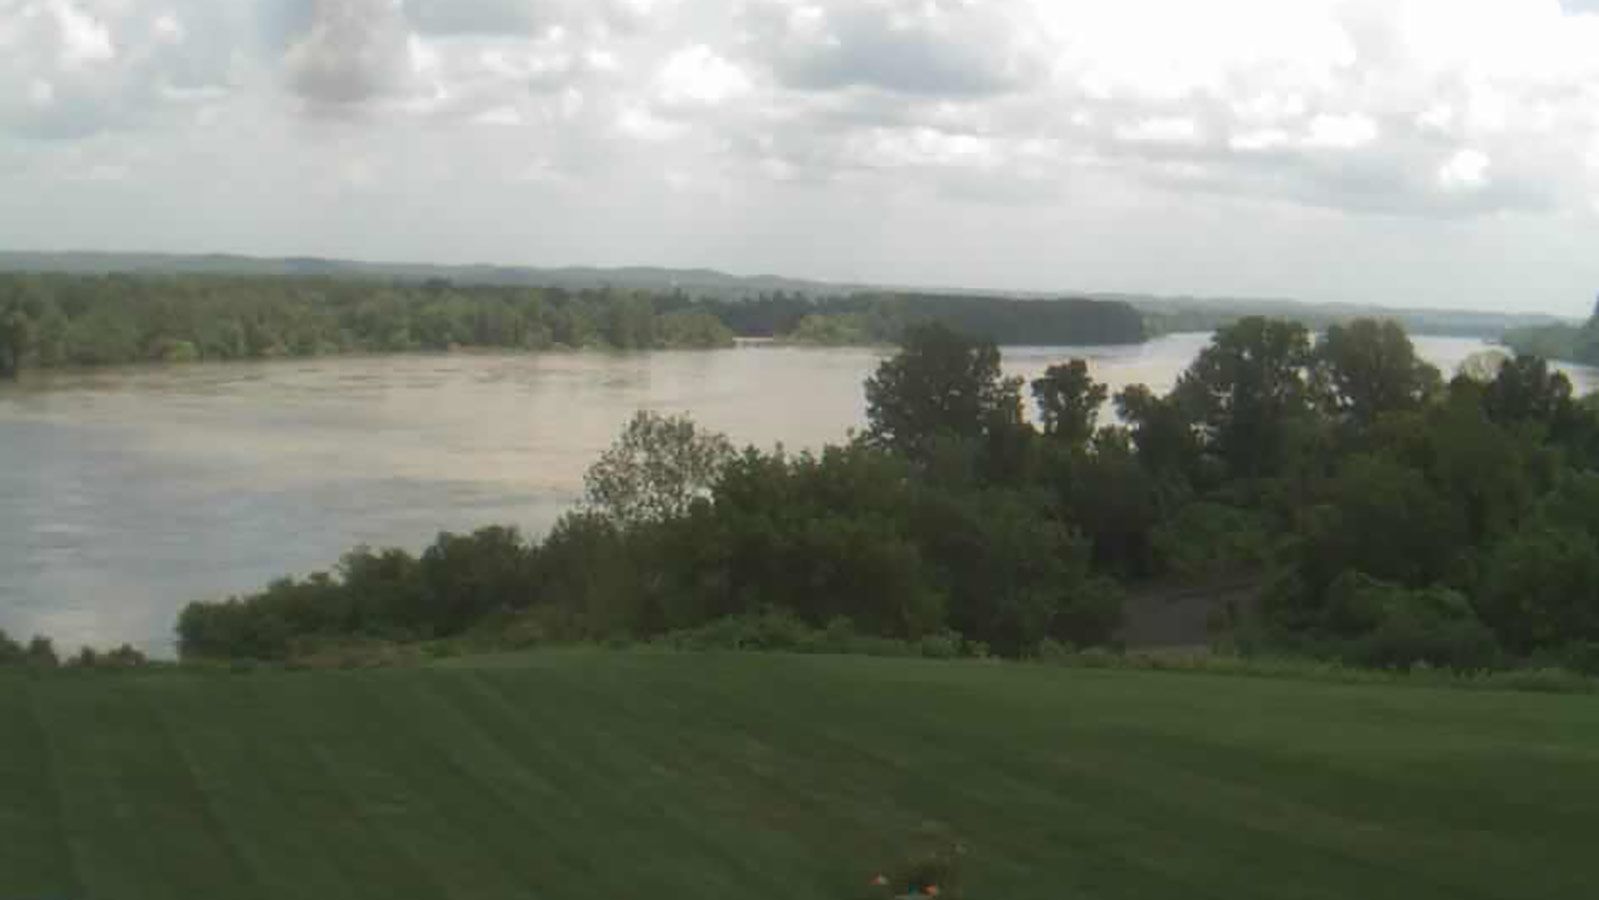 This image, taken from a web camera Friday afternoon, shows the Missouri River near Dundee, Missouri.